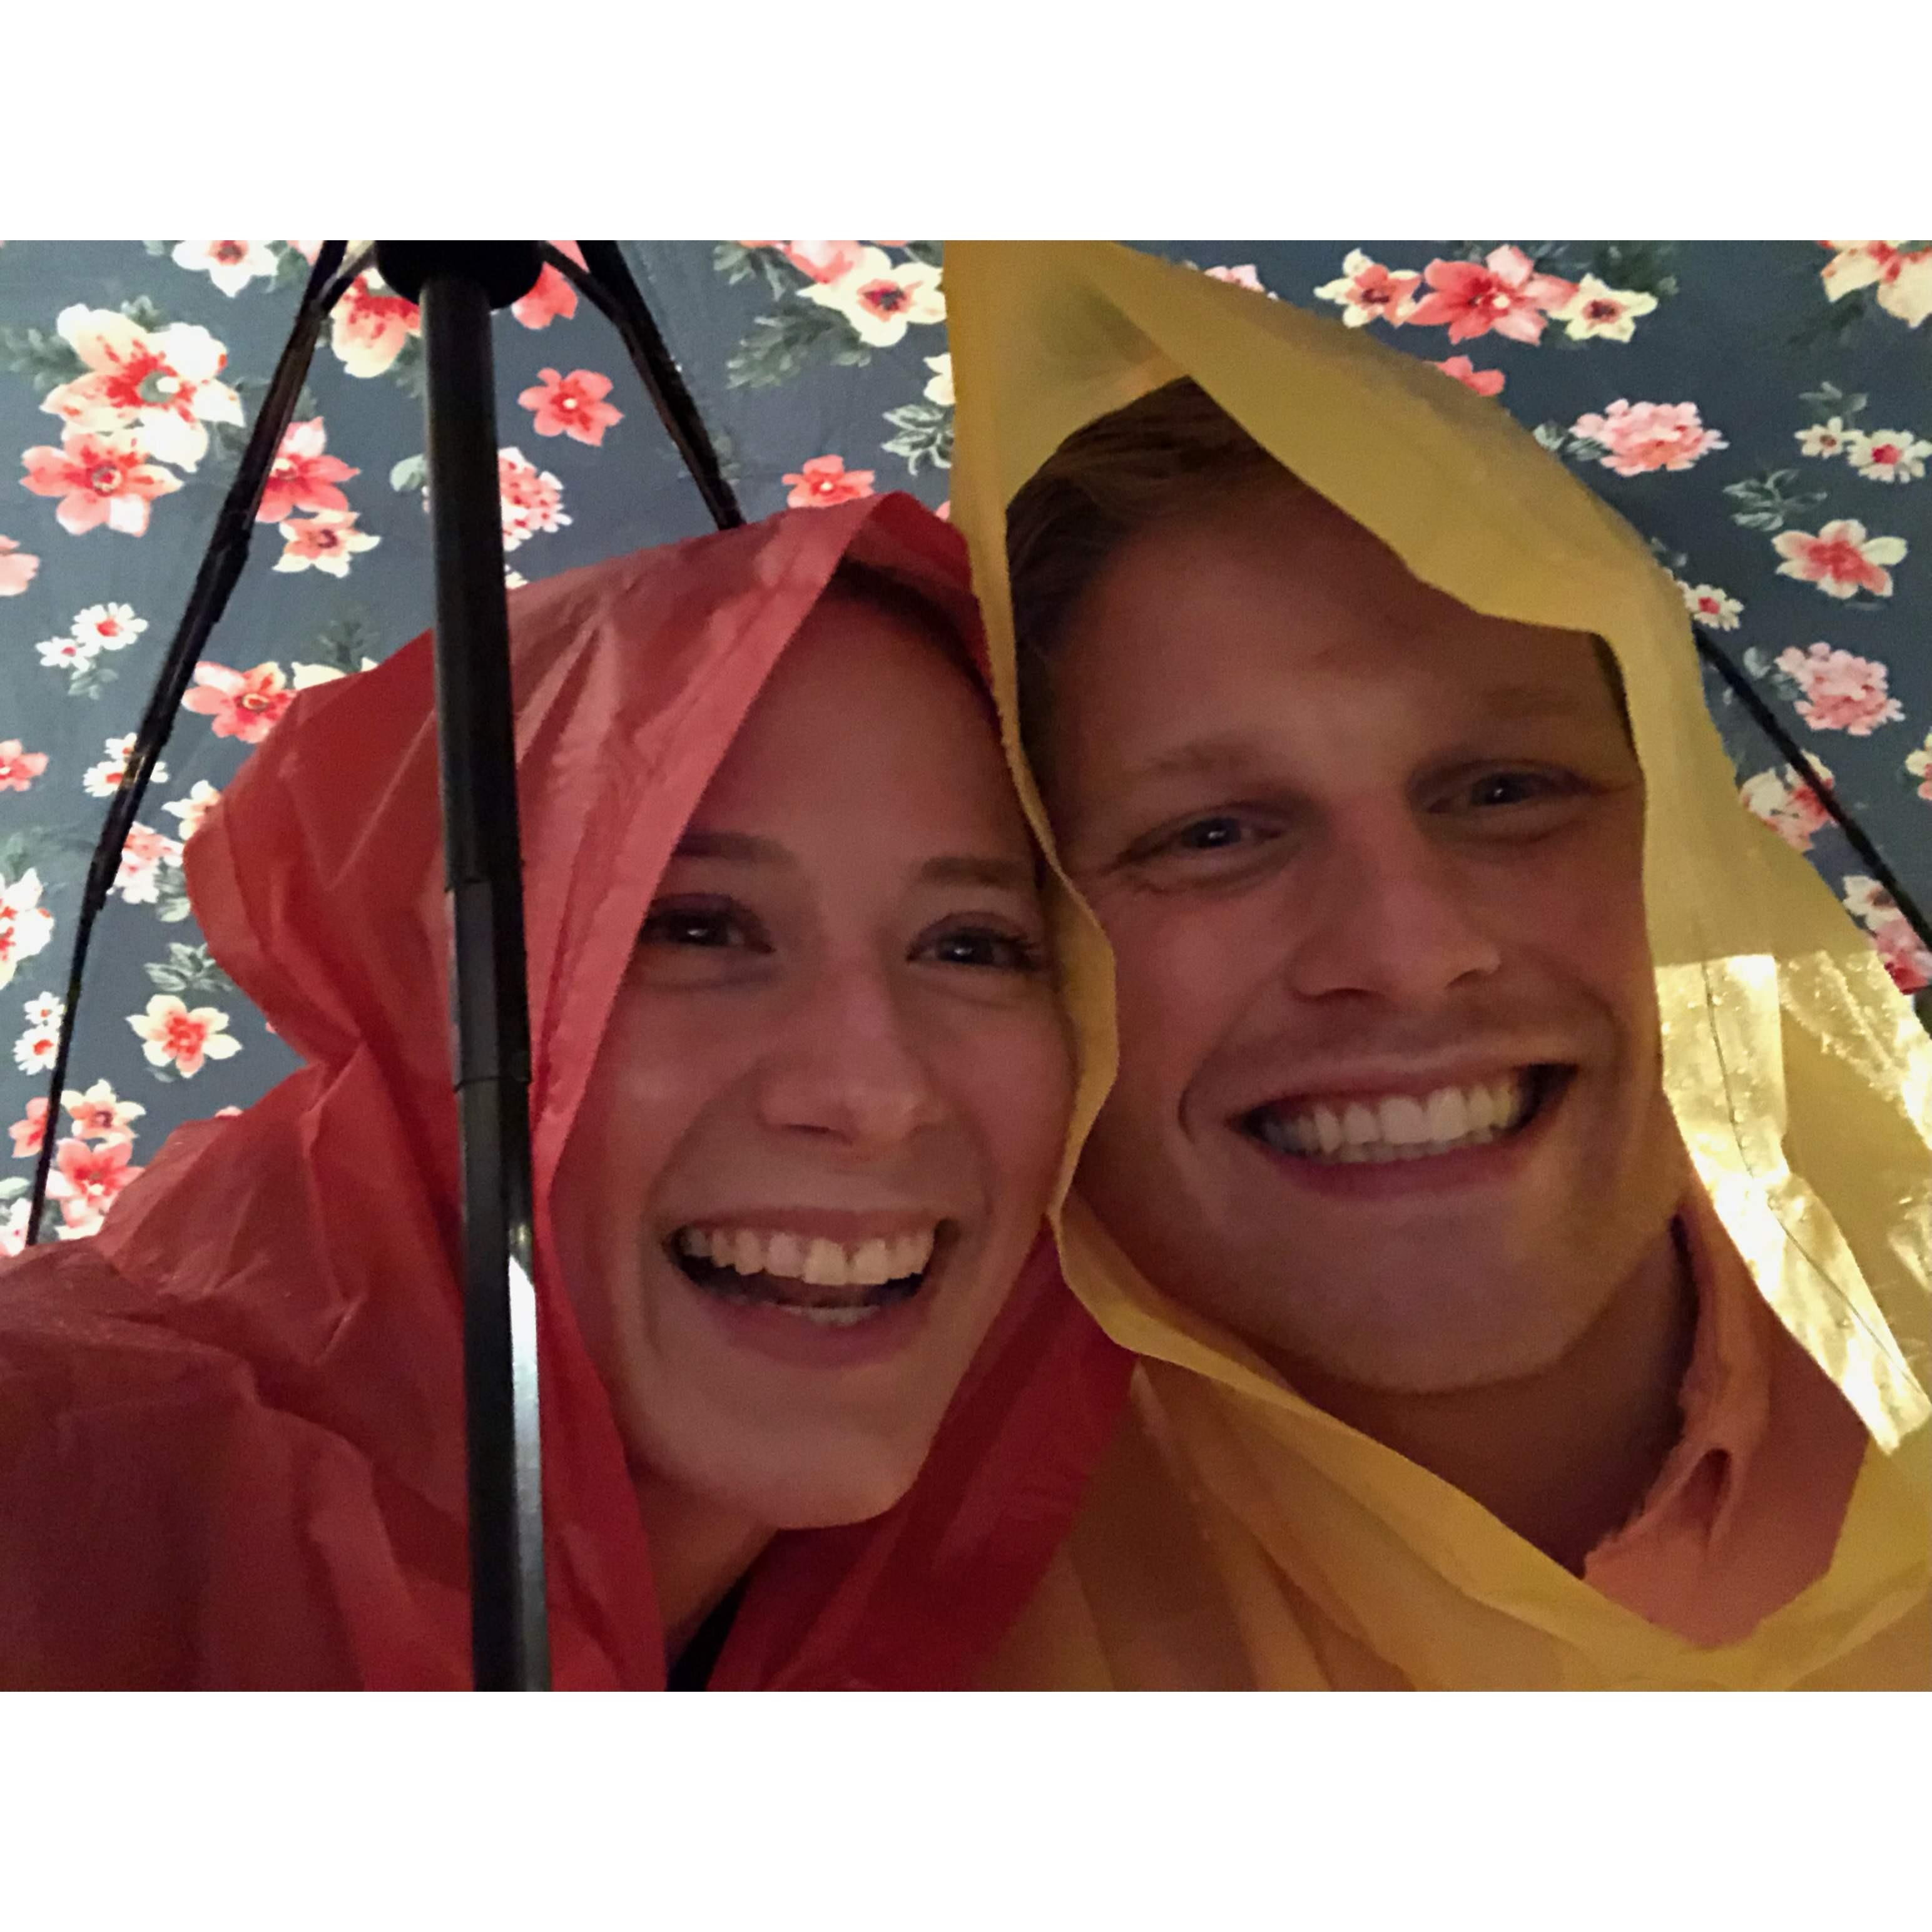 Rained out at Shakespeare in the Park, 2019